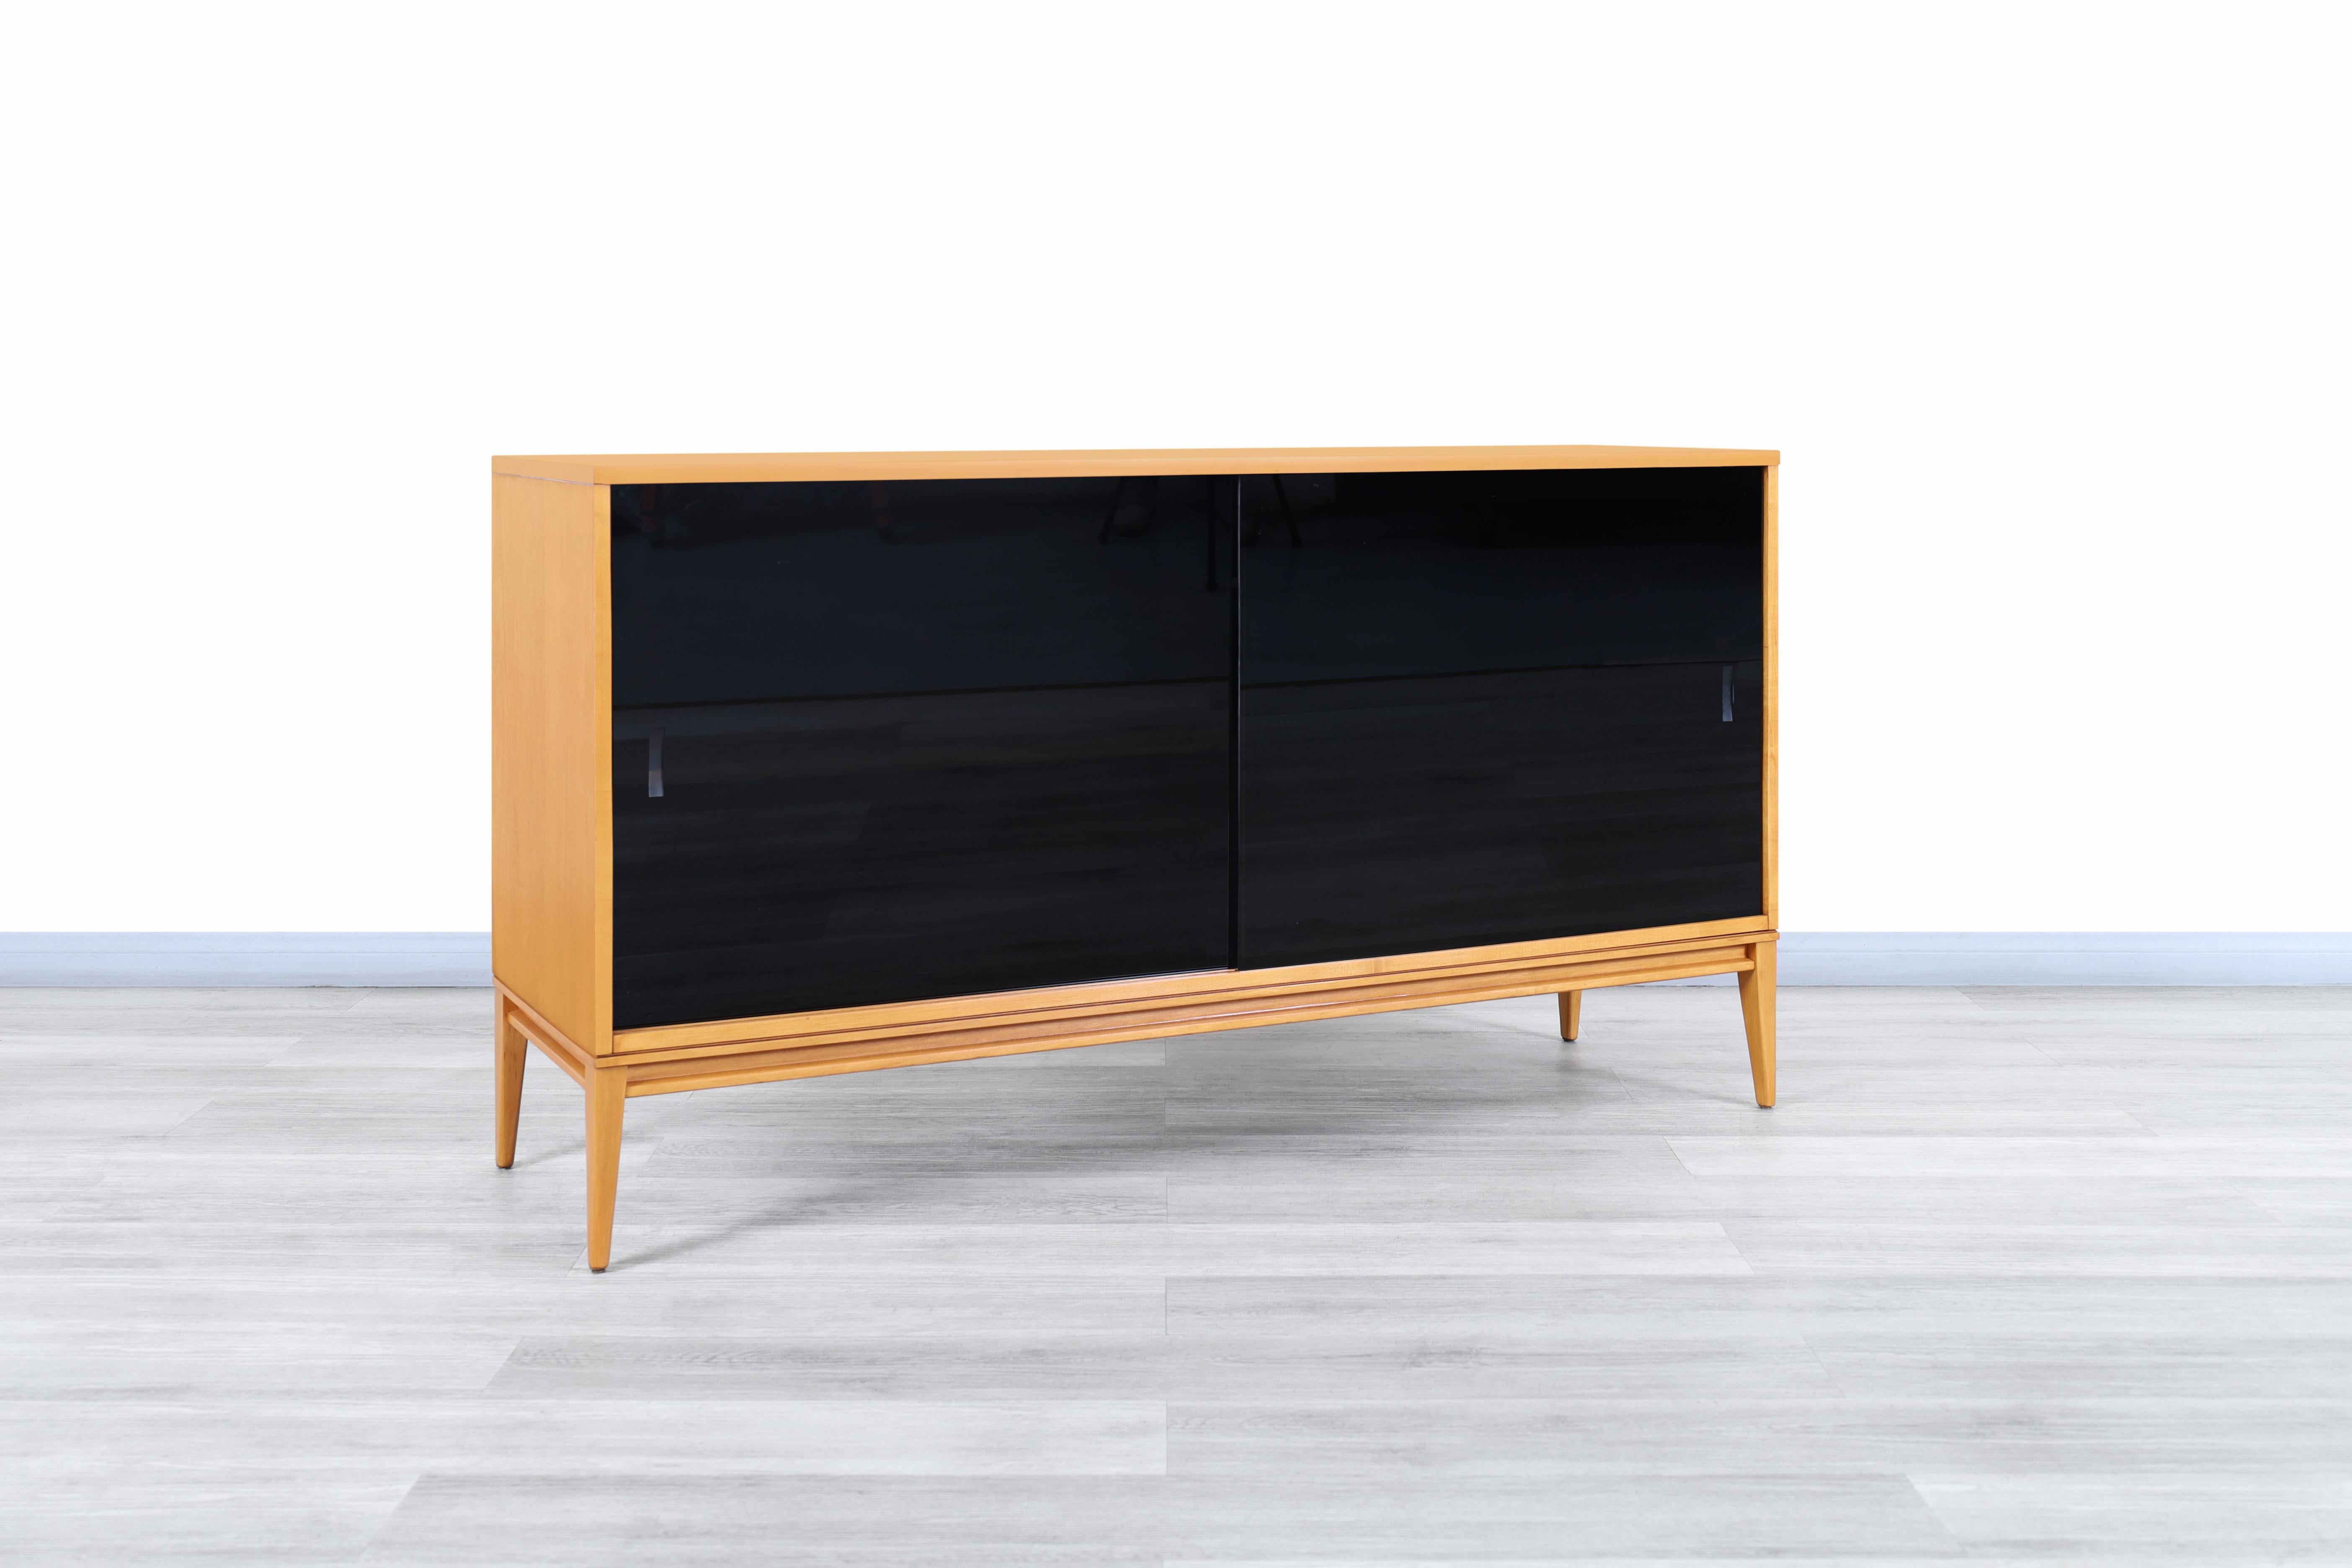 Exceptional vintage “Planner Group” credenza by Paul McCobb for Winchendon Furniture in the United States, circa 1950s. This credenza belongs to the famous 